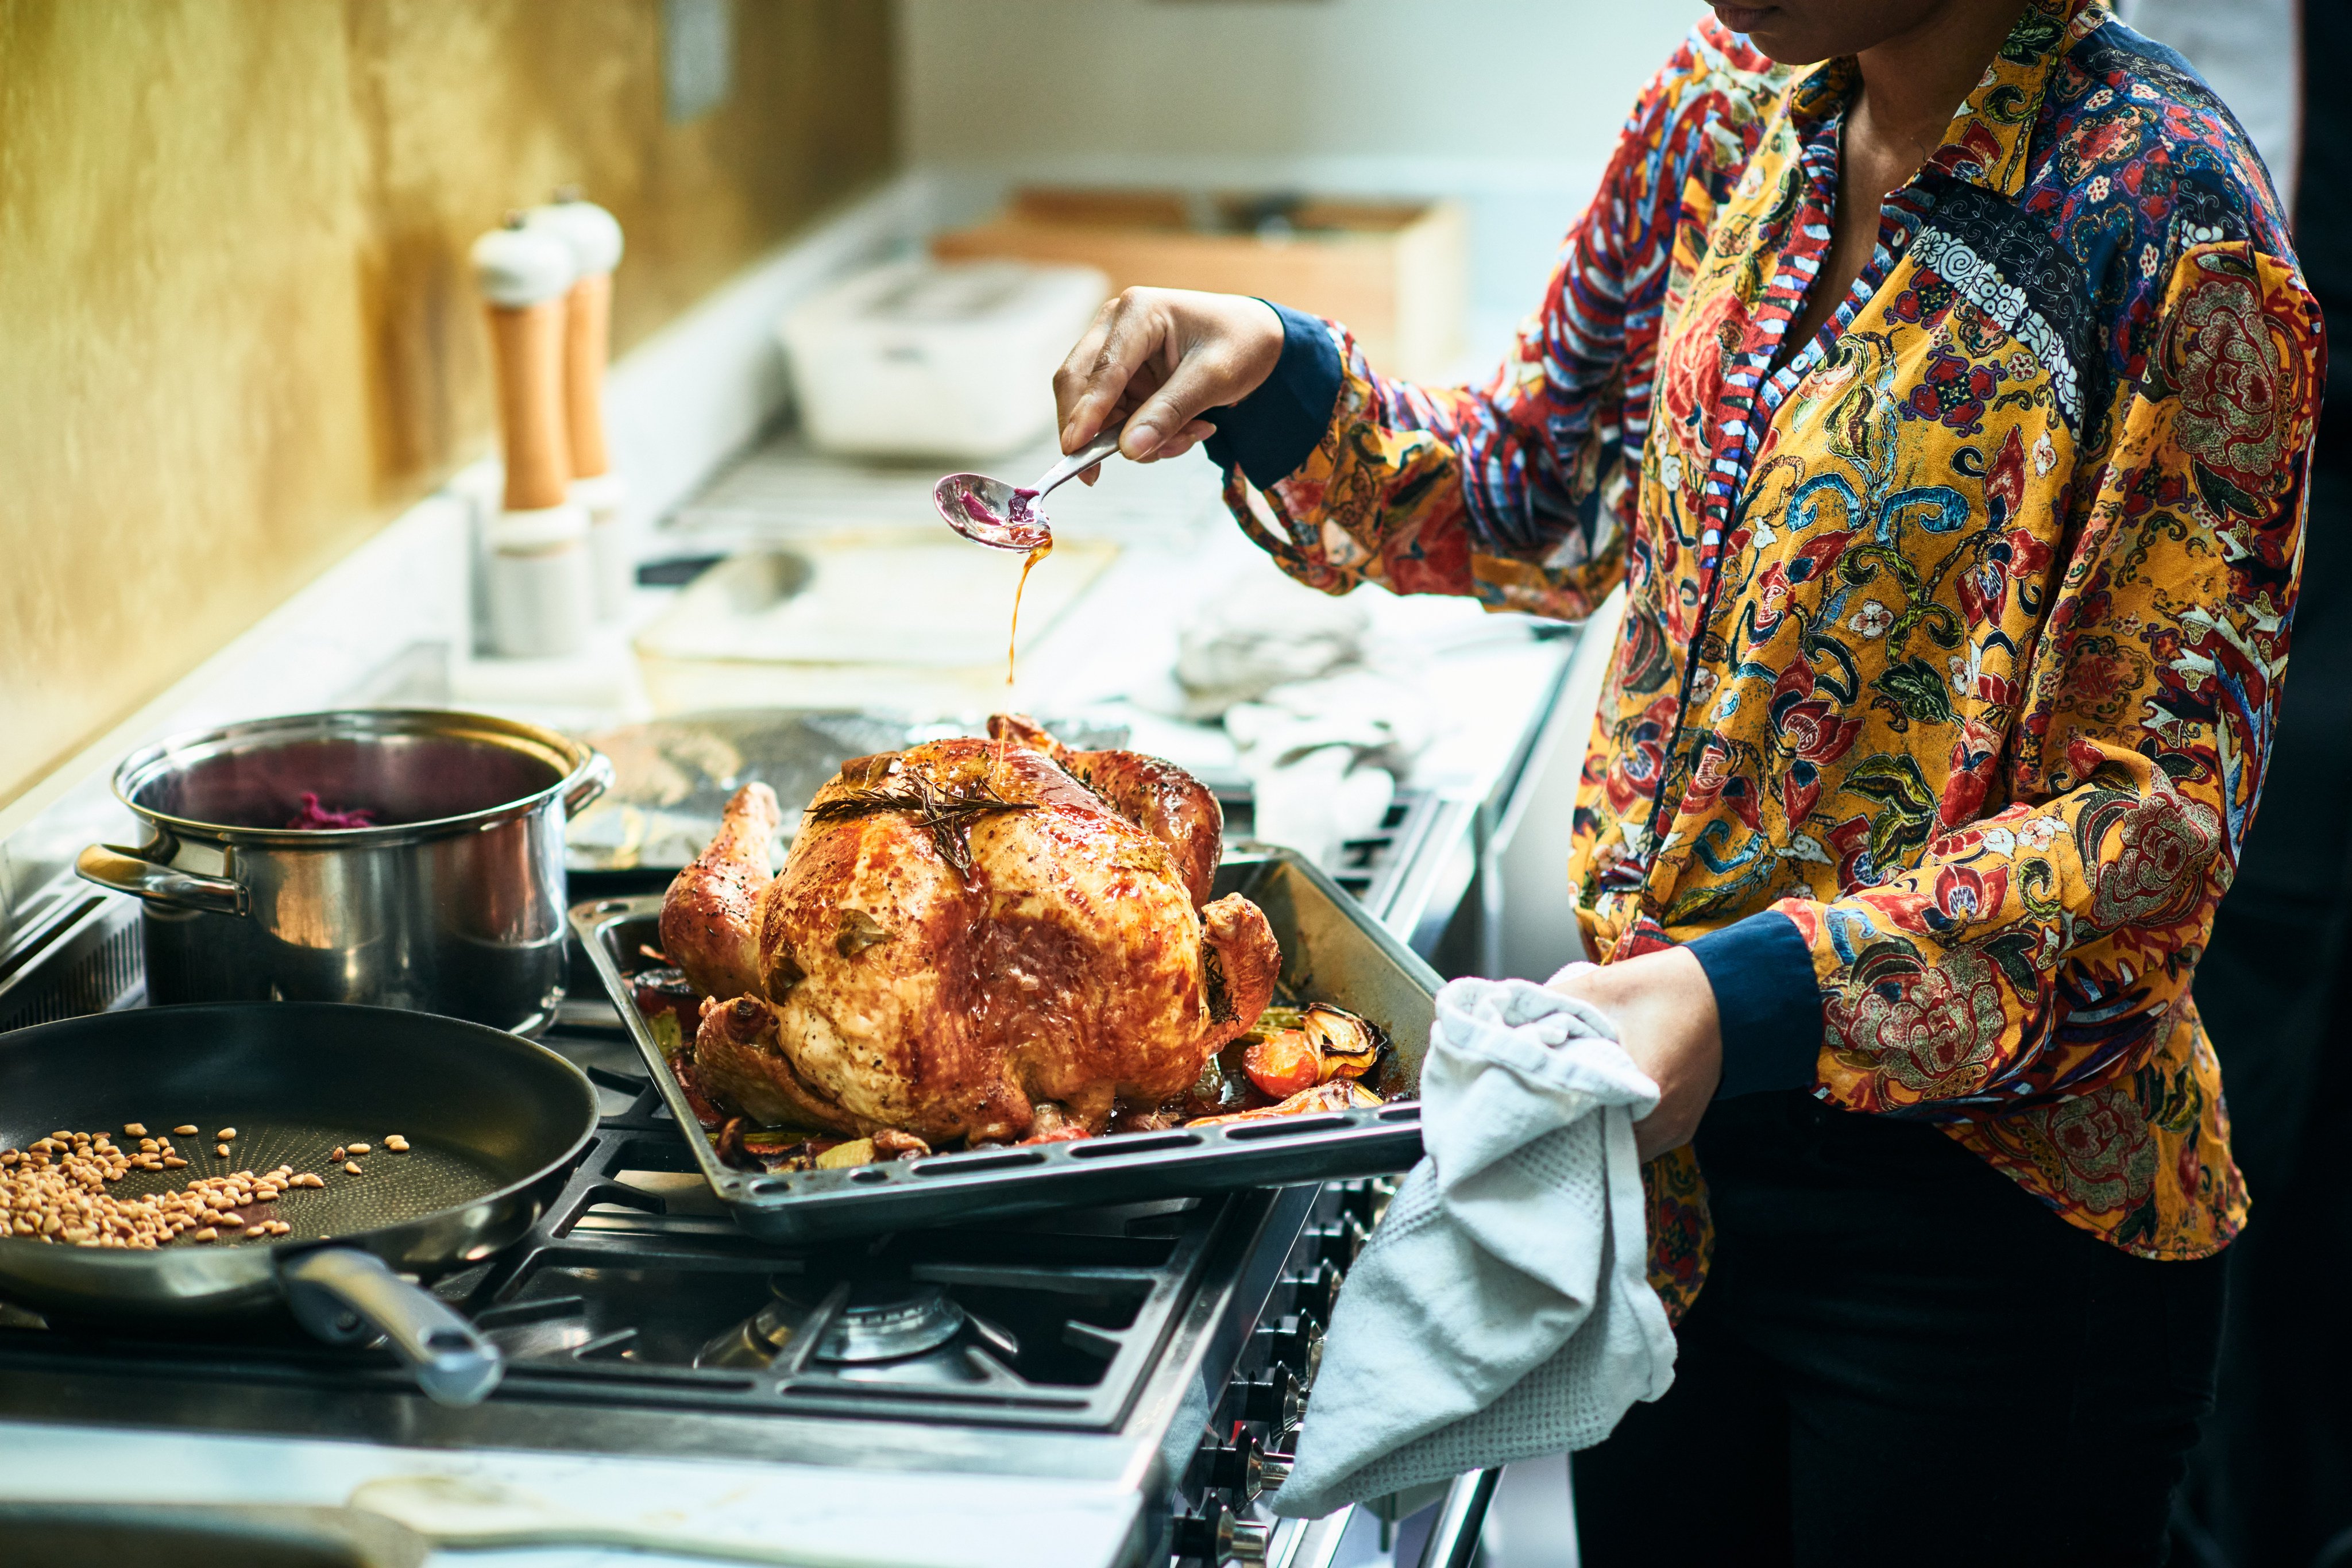 Christmas turkeys are often overcooked and dry, Cliff Buddle says - he hopes his family will do better for his traditional UK Christmas lunch. Photo: Getty Images